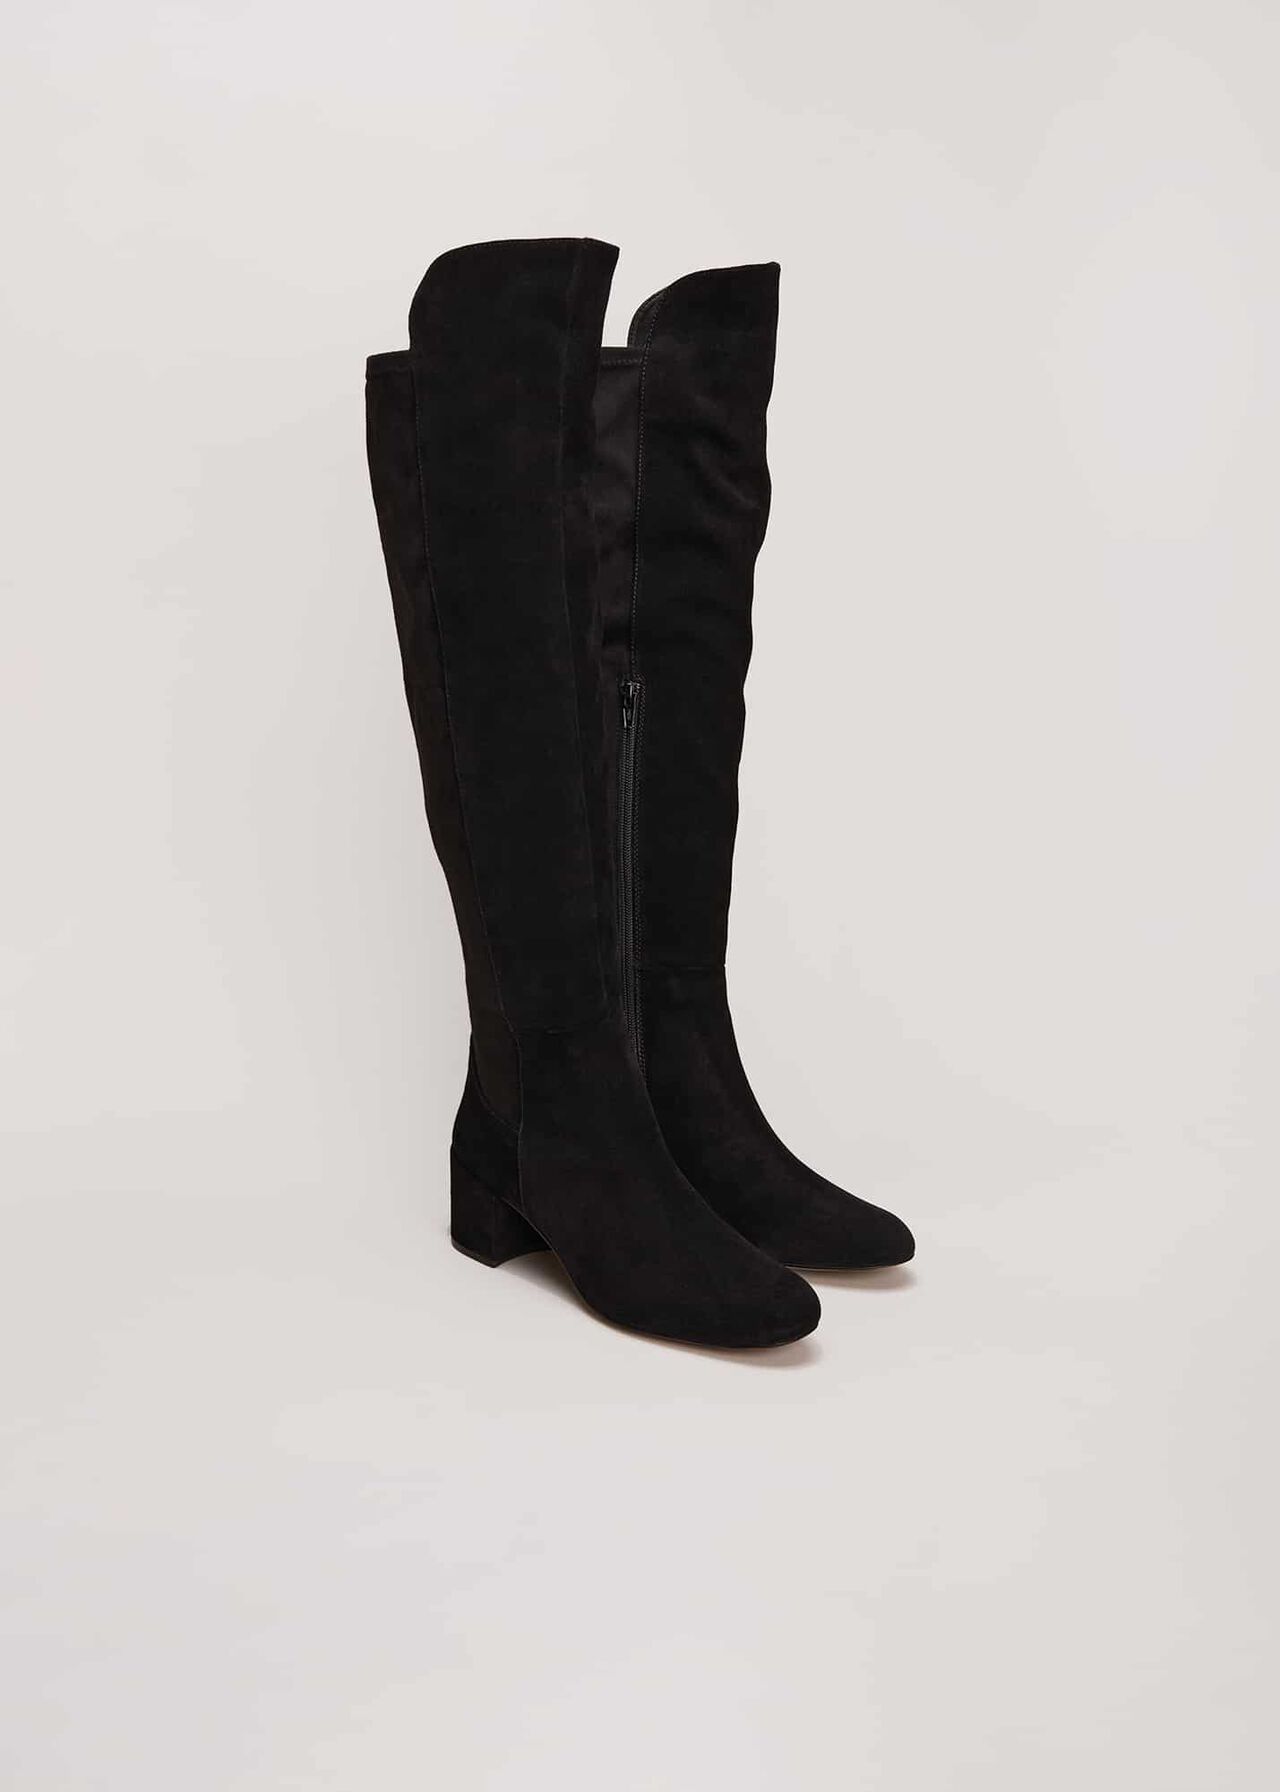 Milly Black Leather Knee High Boots